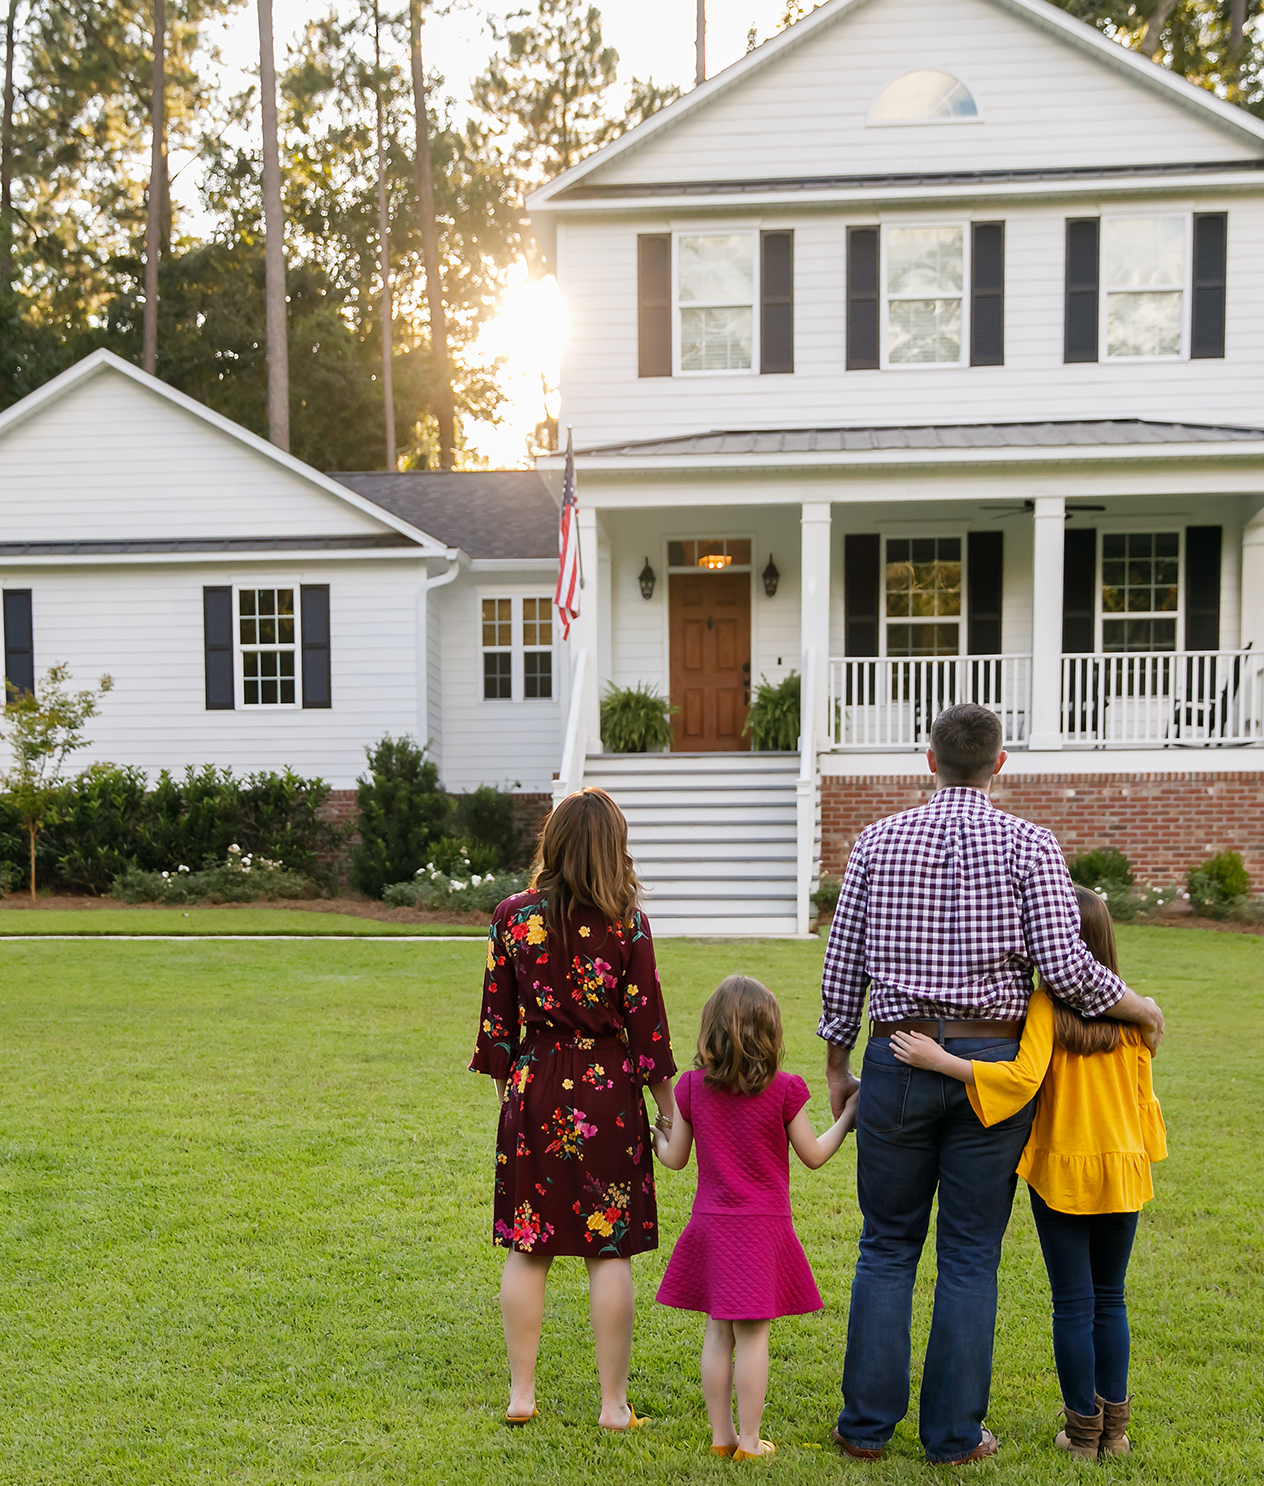 The Most Trusted Decatur Home Warranty